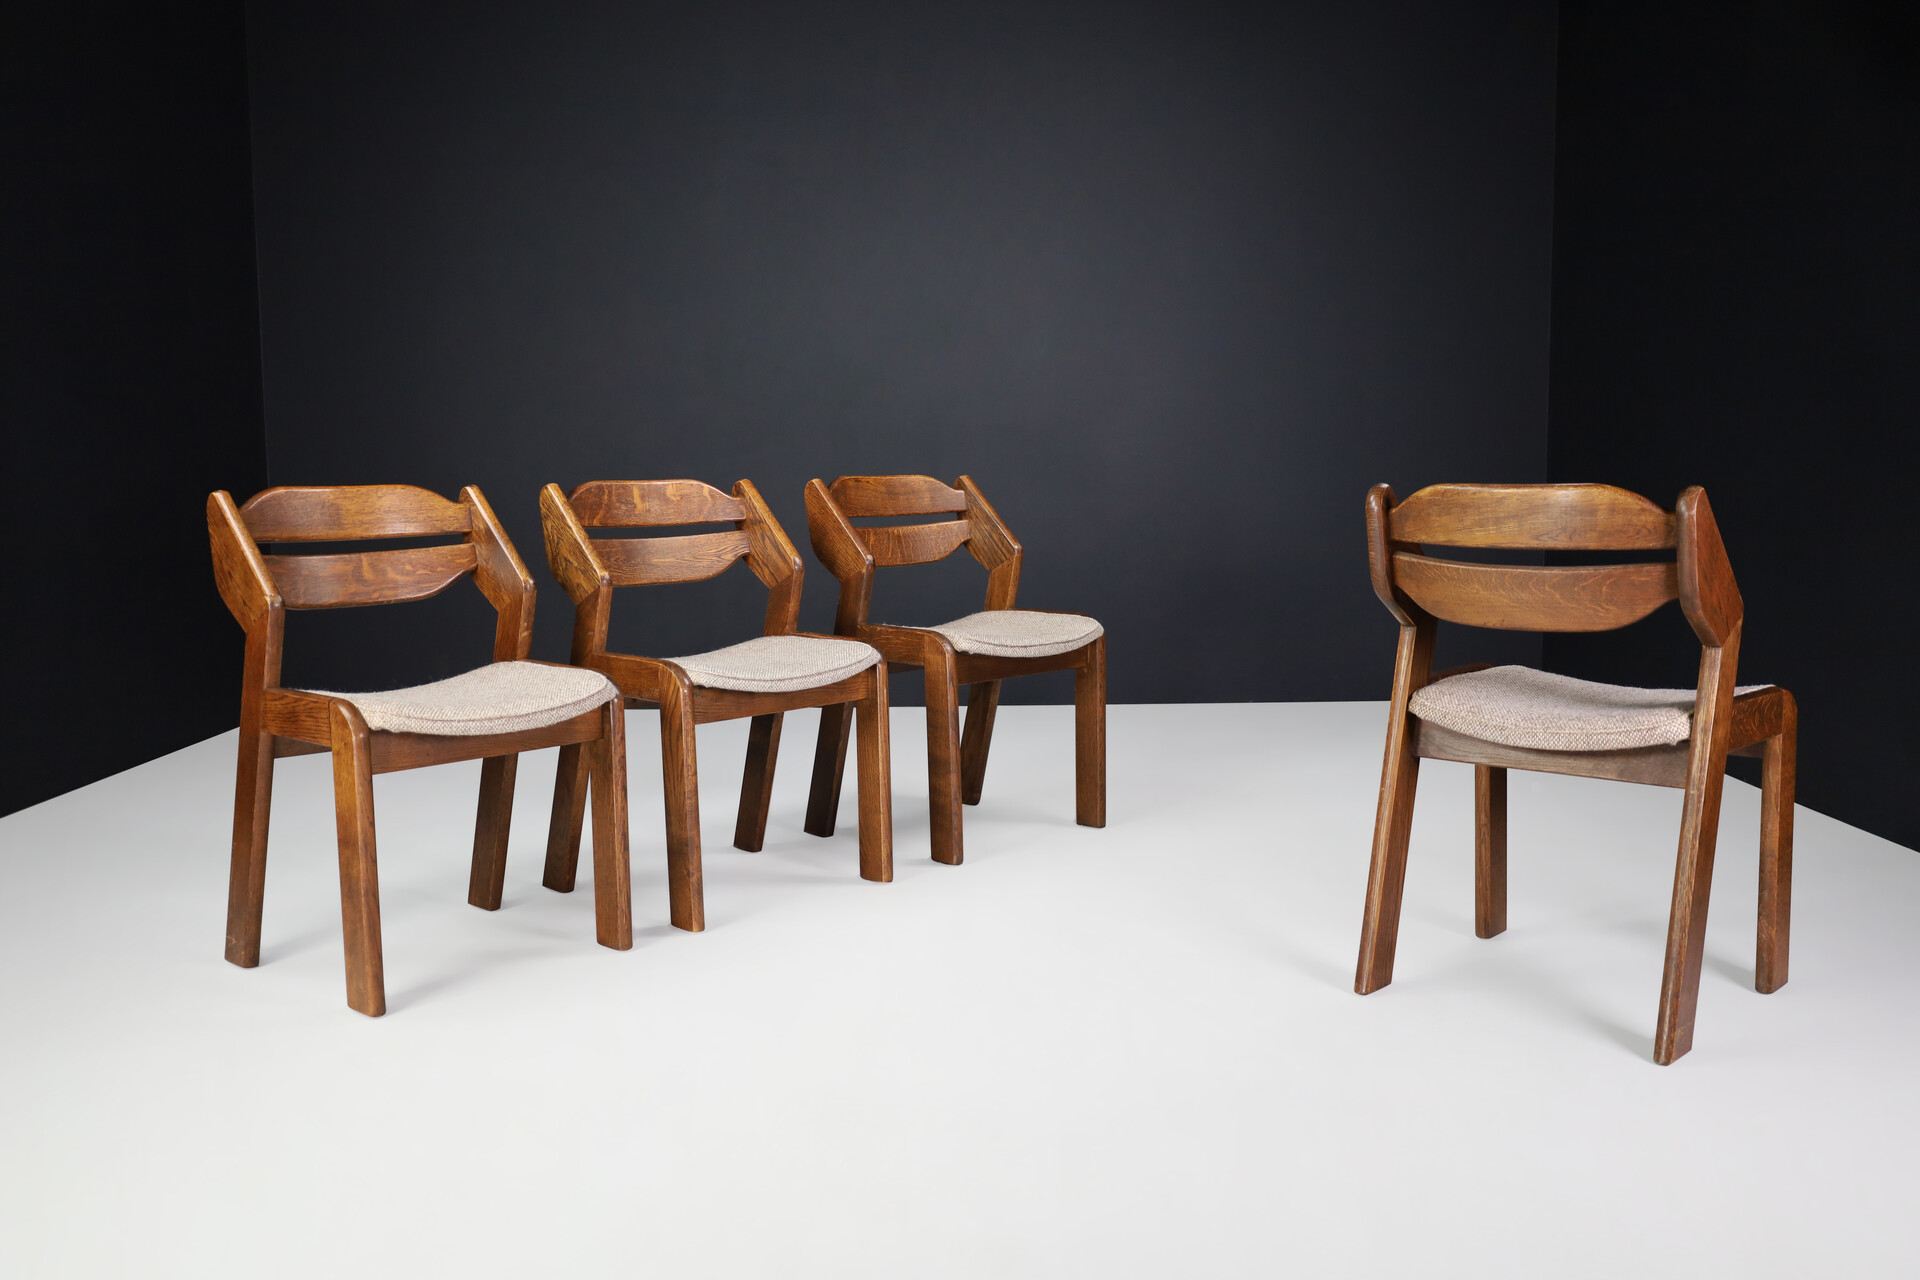 Brutalist Oak Dining room / side chairs, the Netherlands 1960s Mid-20th century